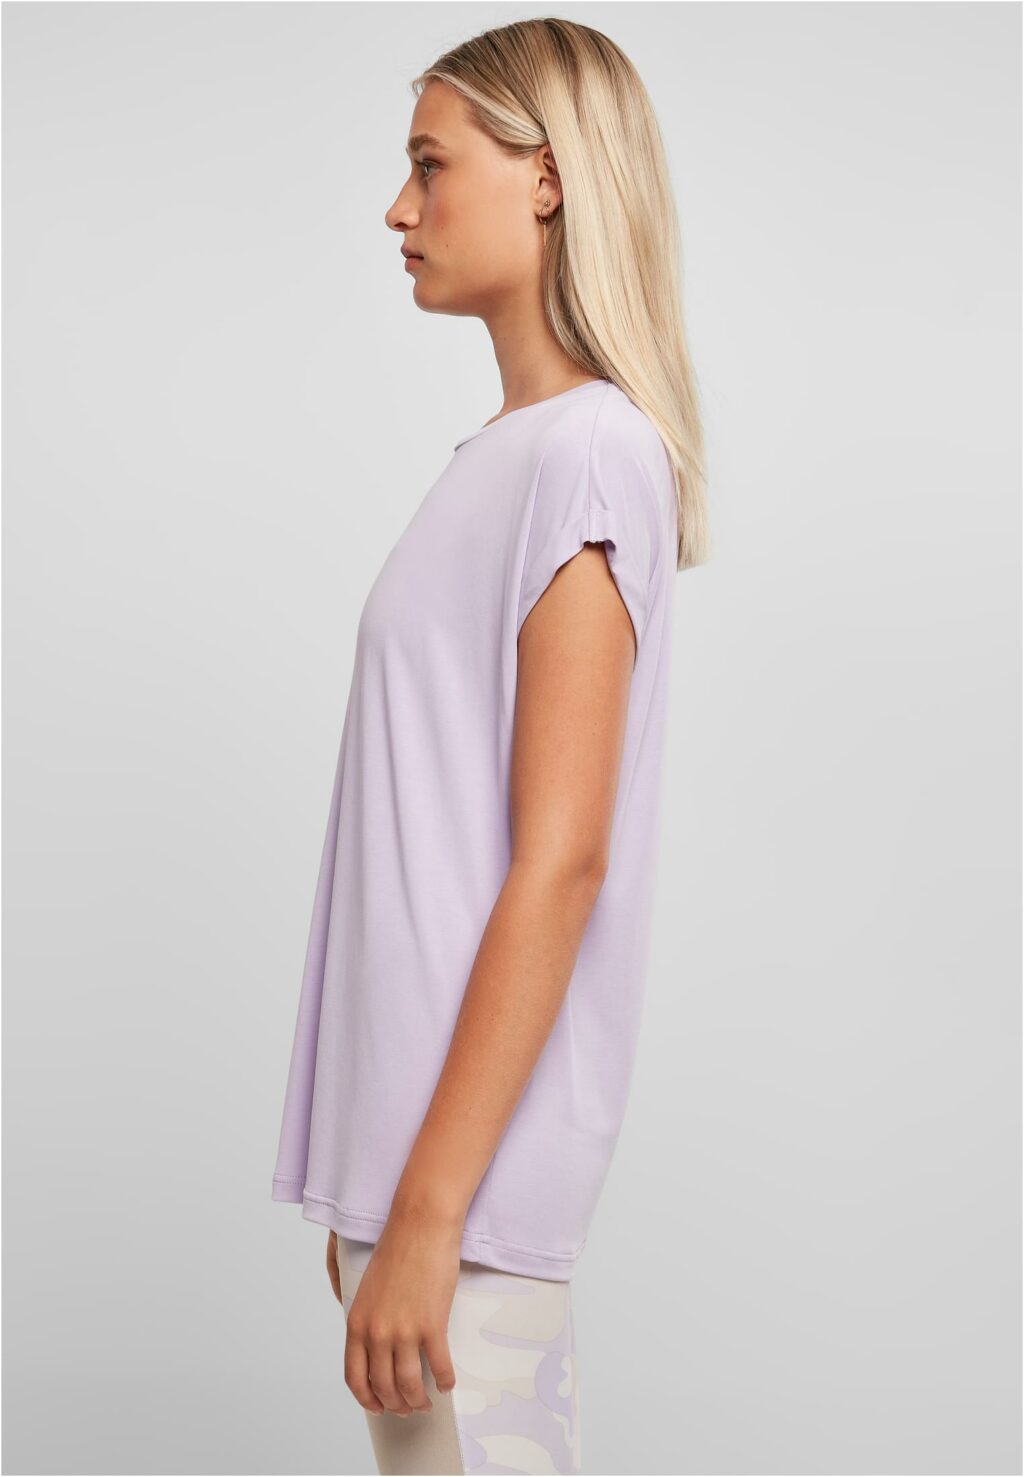 Urban Classics Ladies Modal Extended Shoulder Tee lilac TB4092